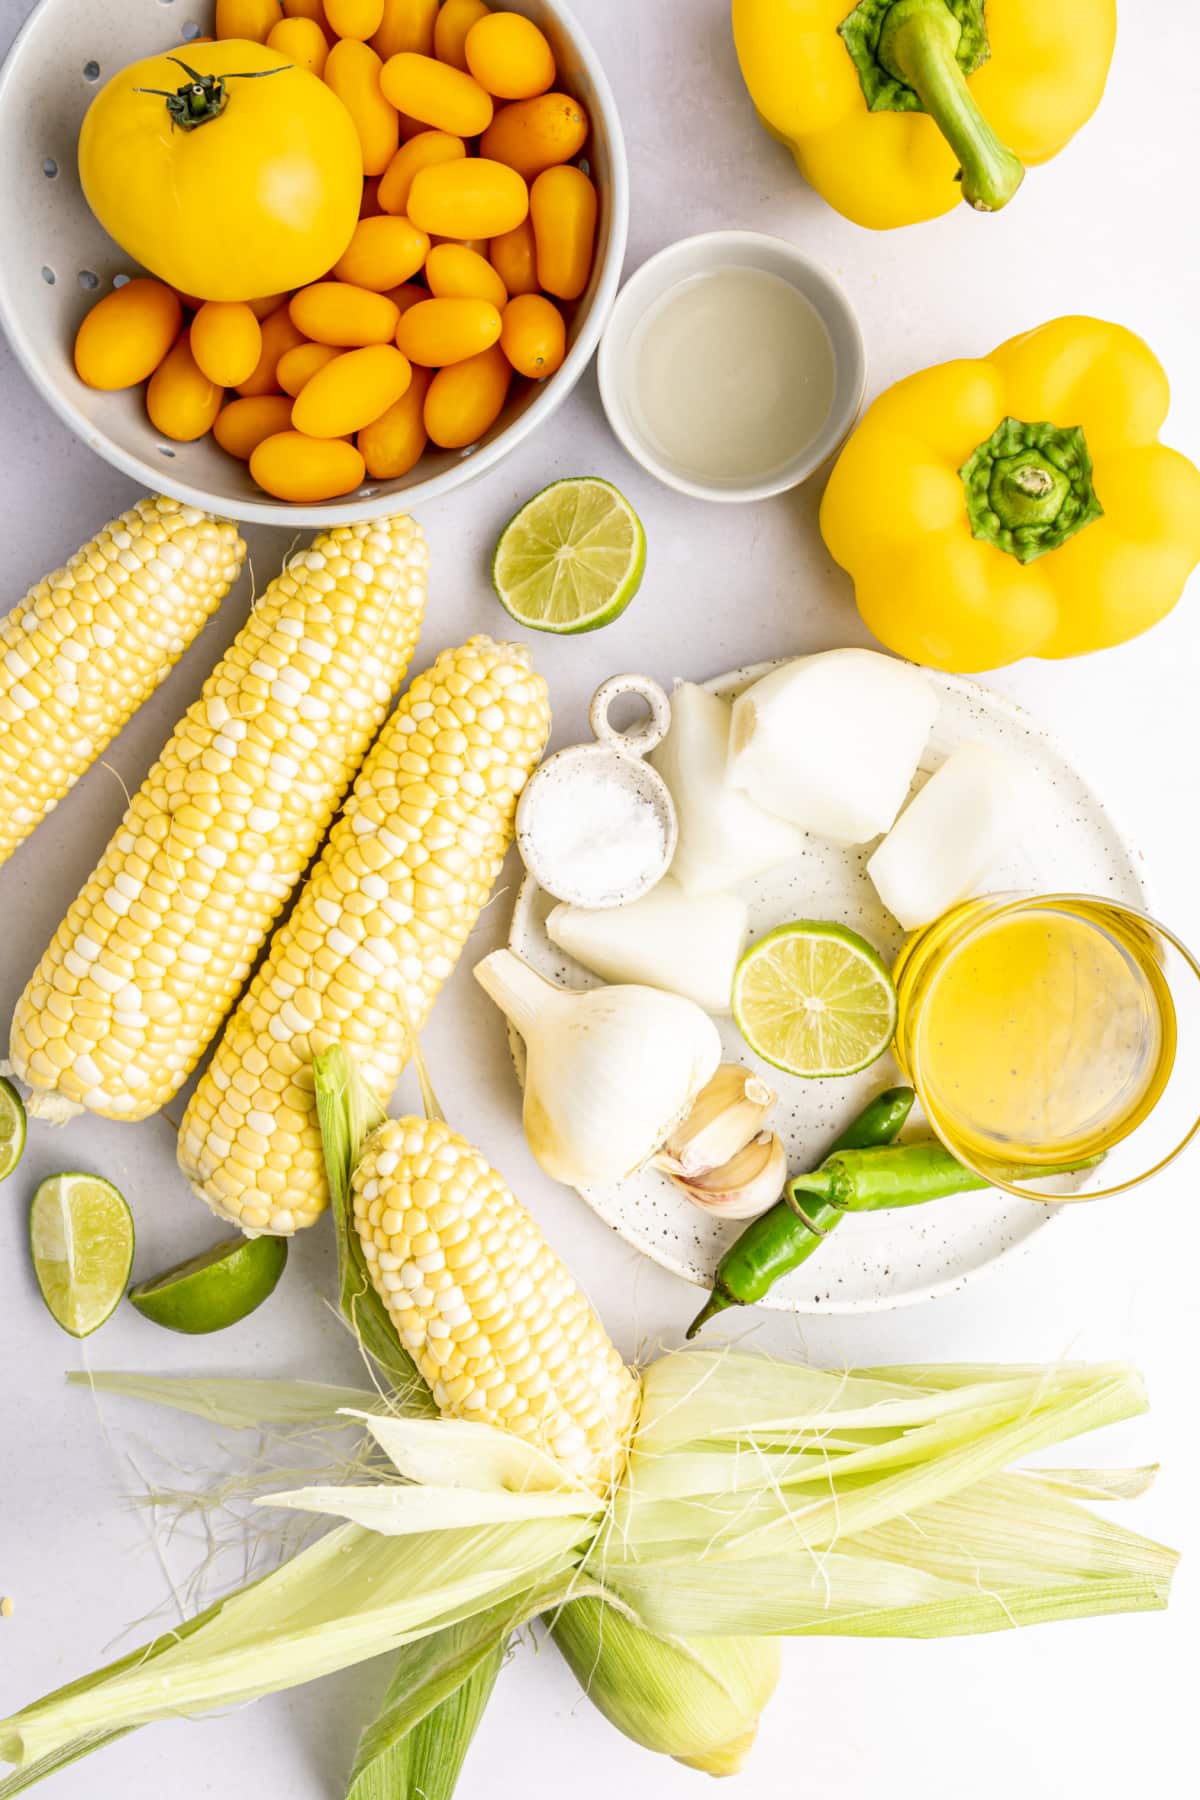 Overhead view of ingredients for summer corn gazpacho: yellow tomatoes, yellow bell pepper, fresh corn on the cob, limes, garlic bulbs, Serrano peppers